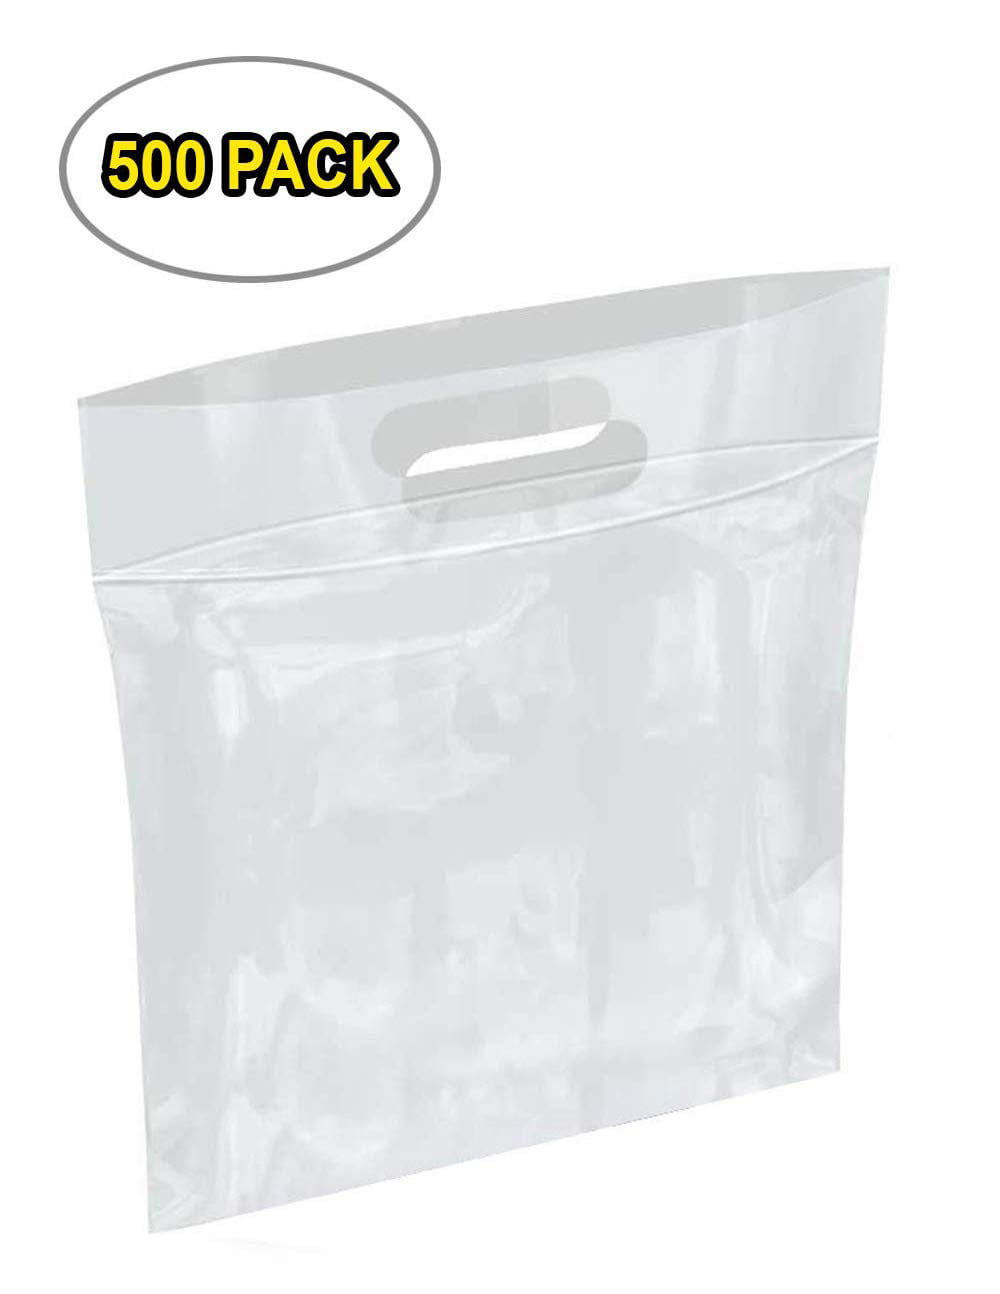 Dropship 100 Pack Die Cut Zipper Bags 9 X 12. Thickness 3 Mil; 3 Inch Lip.  Clear Poly Handle Bags 9x12. Polyethylene Industrial Plastic Bags For Food  Service; Health Needs. to Sell